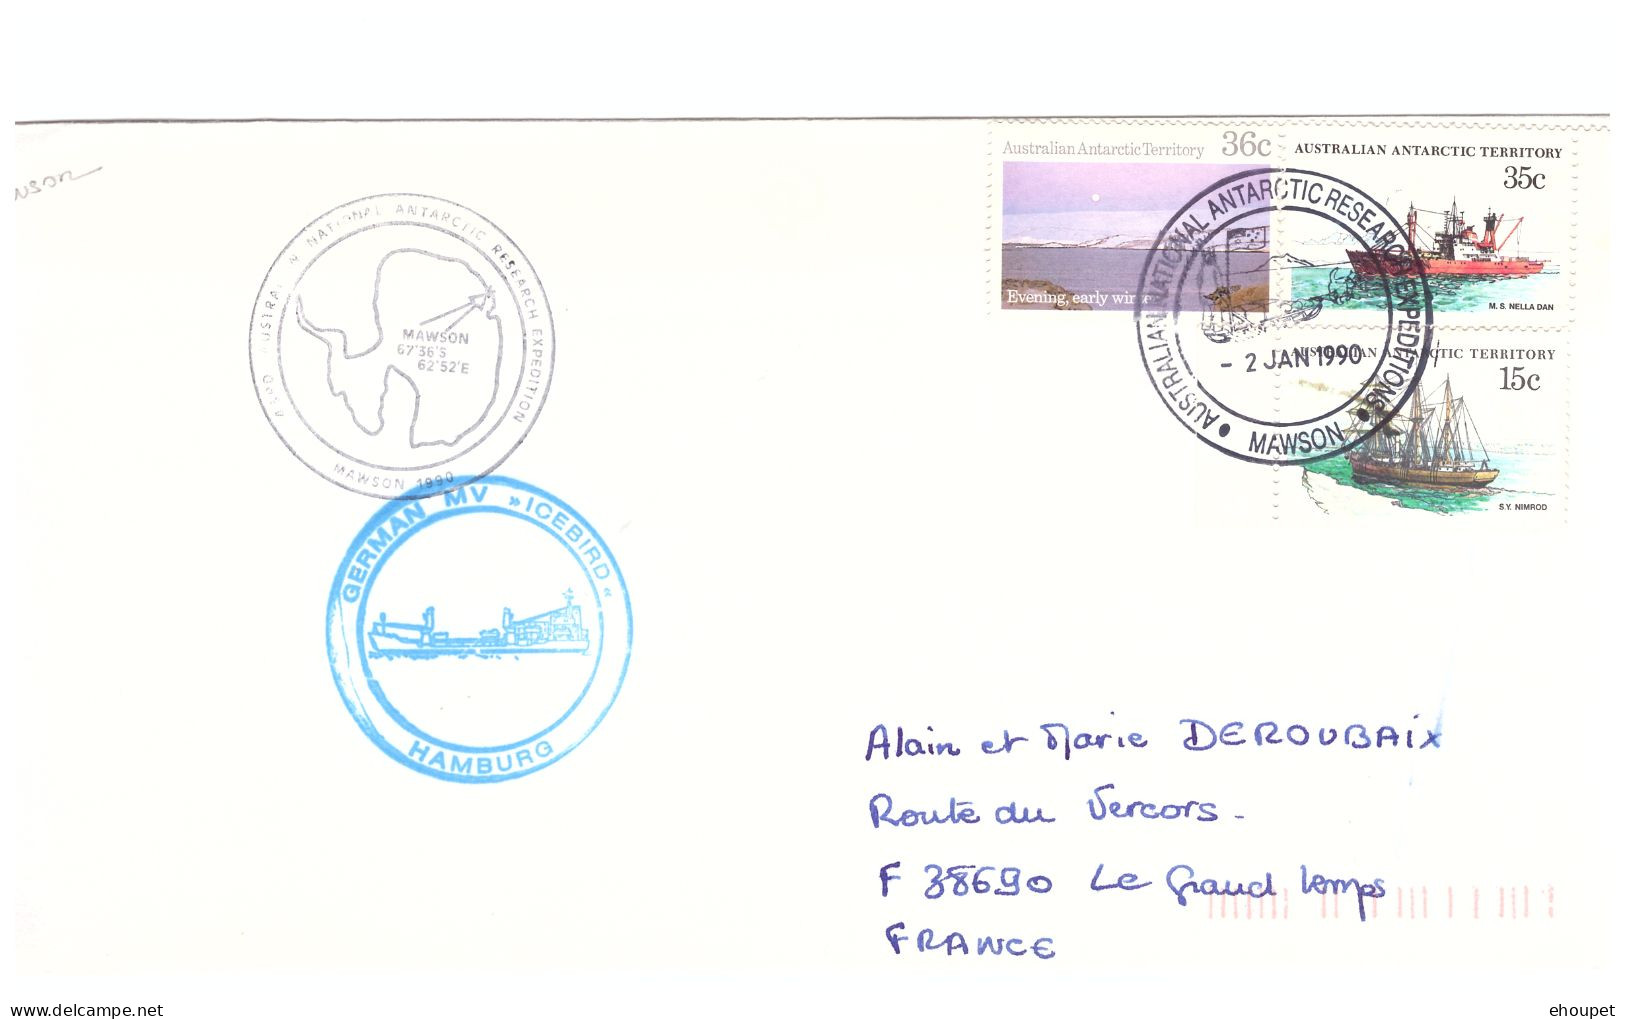 2 JANVIER 1990 ICEBIRD A MAWSON - Covers & Documents